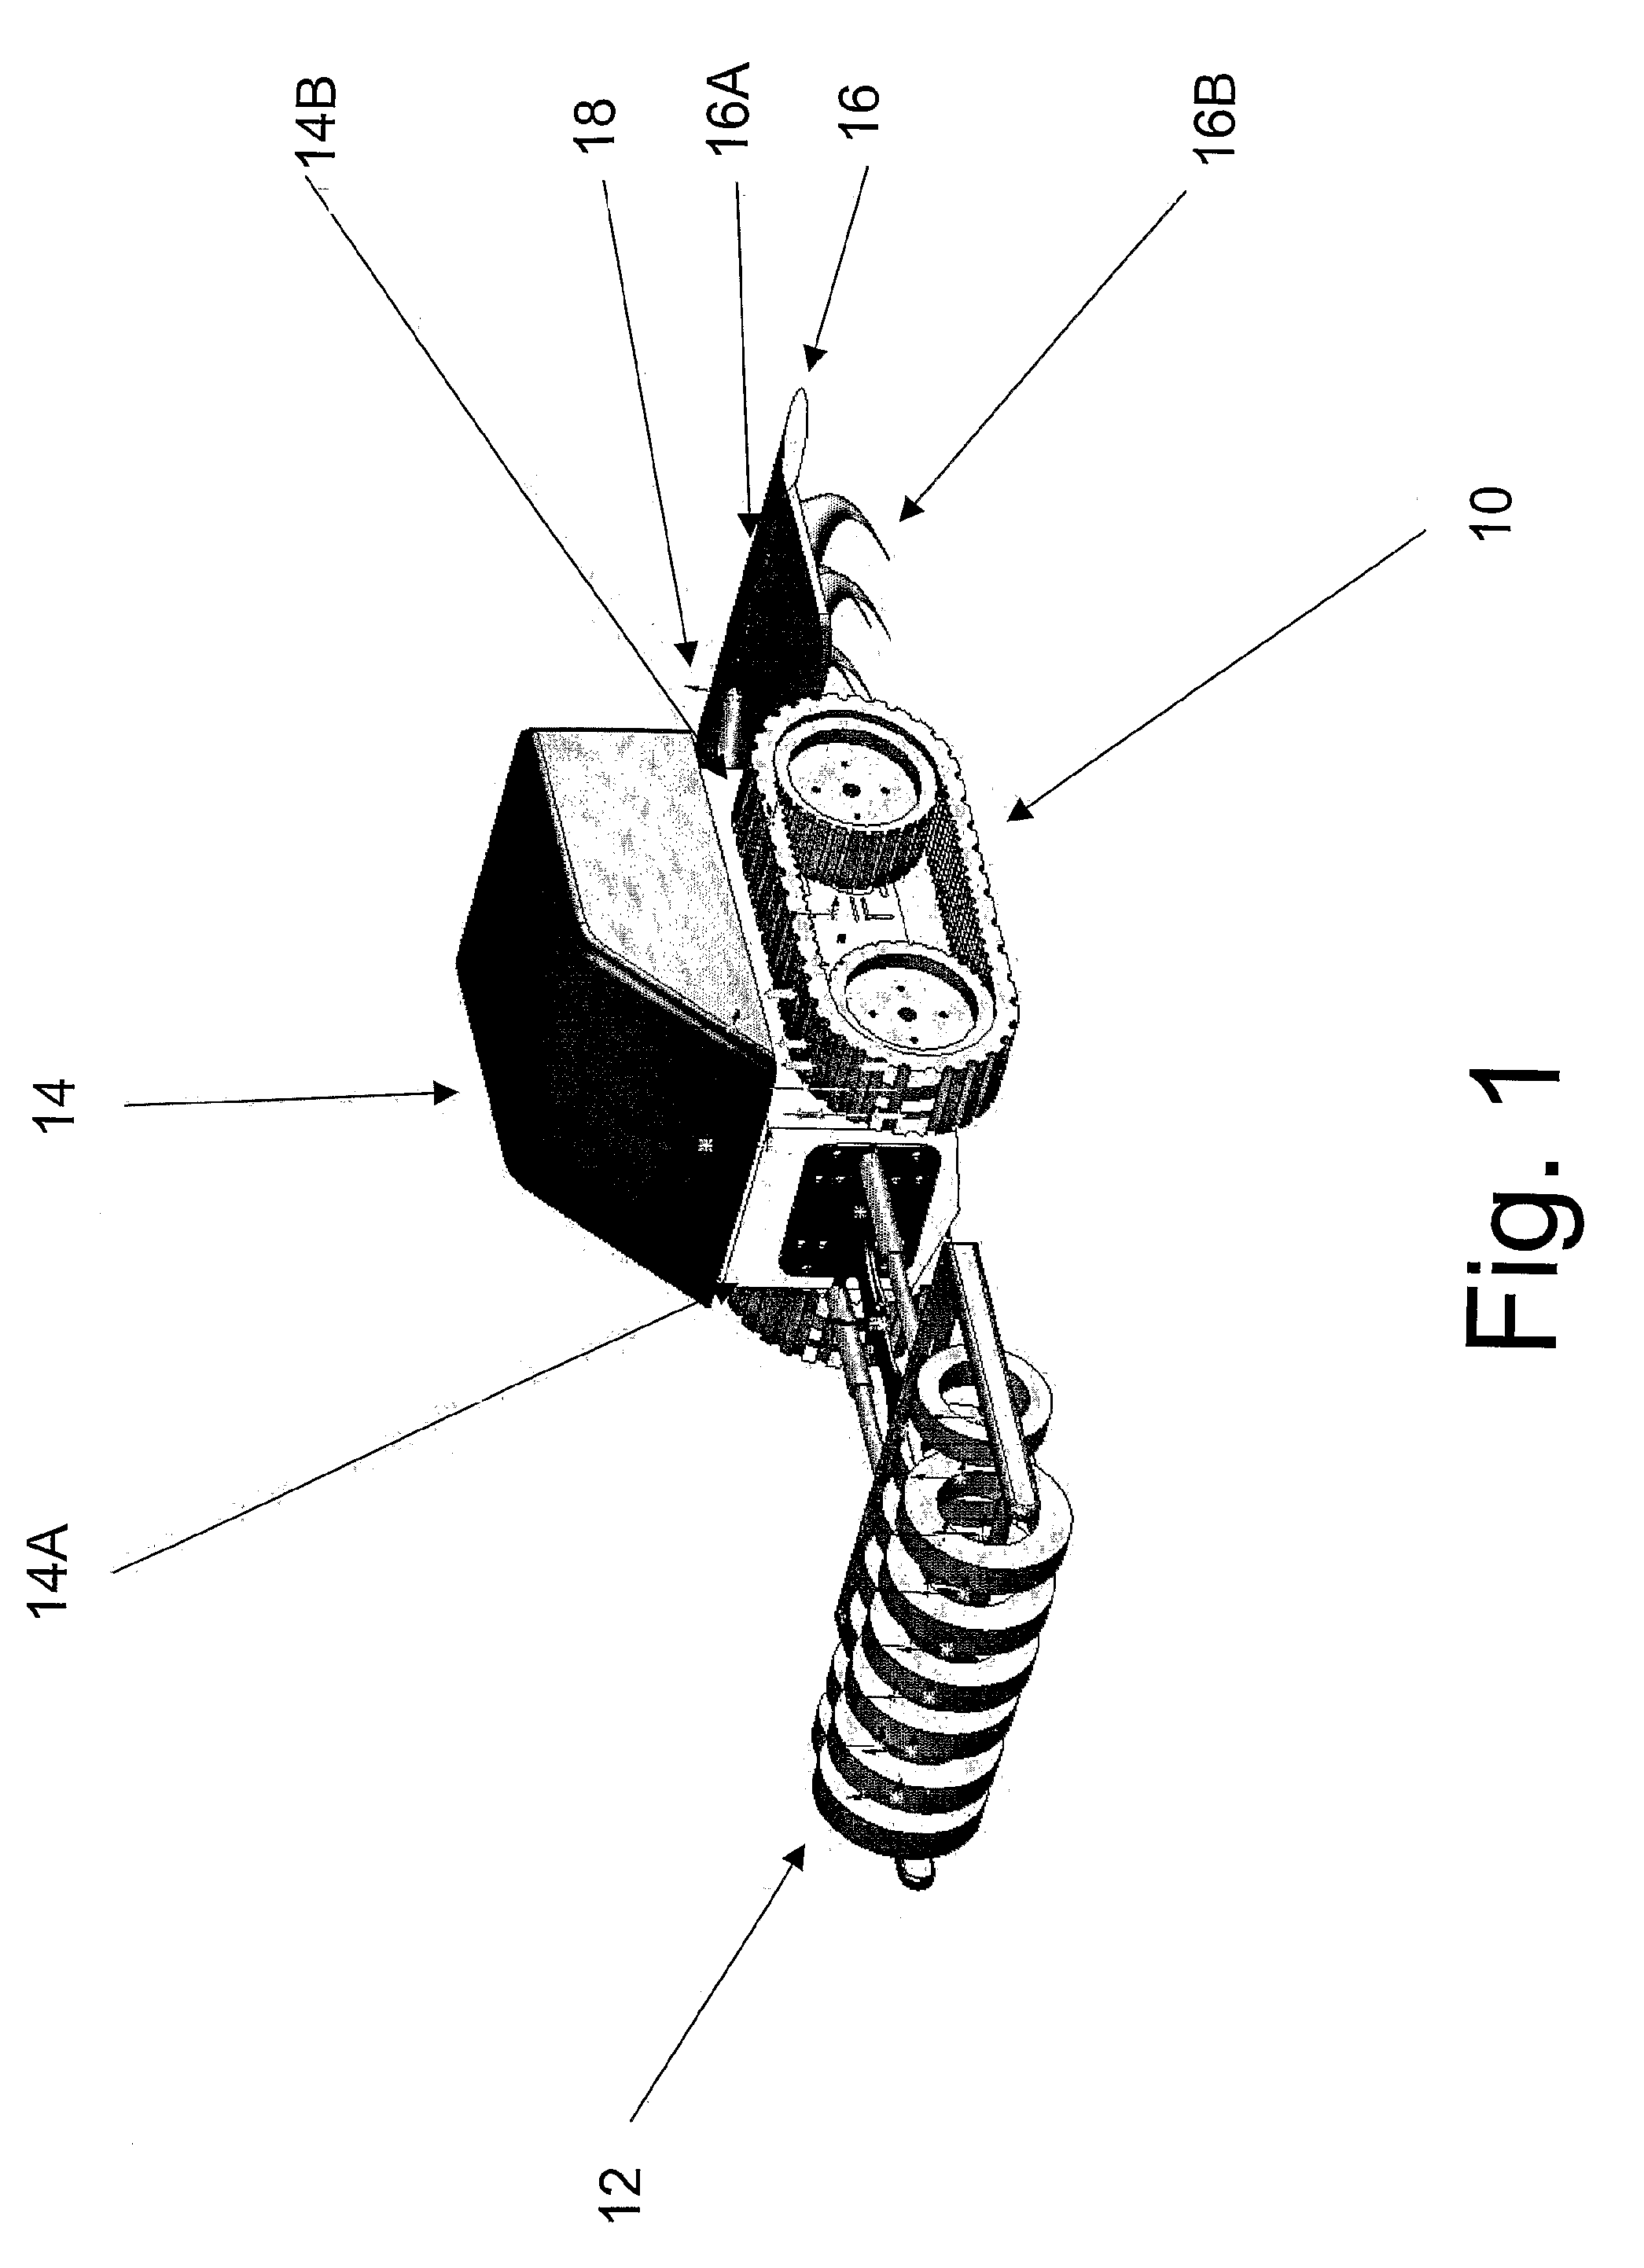 Apparatus and Method for Clearing Land Mines